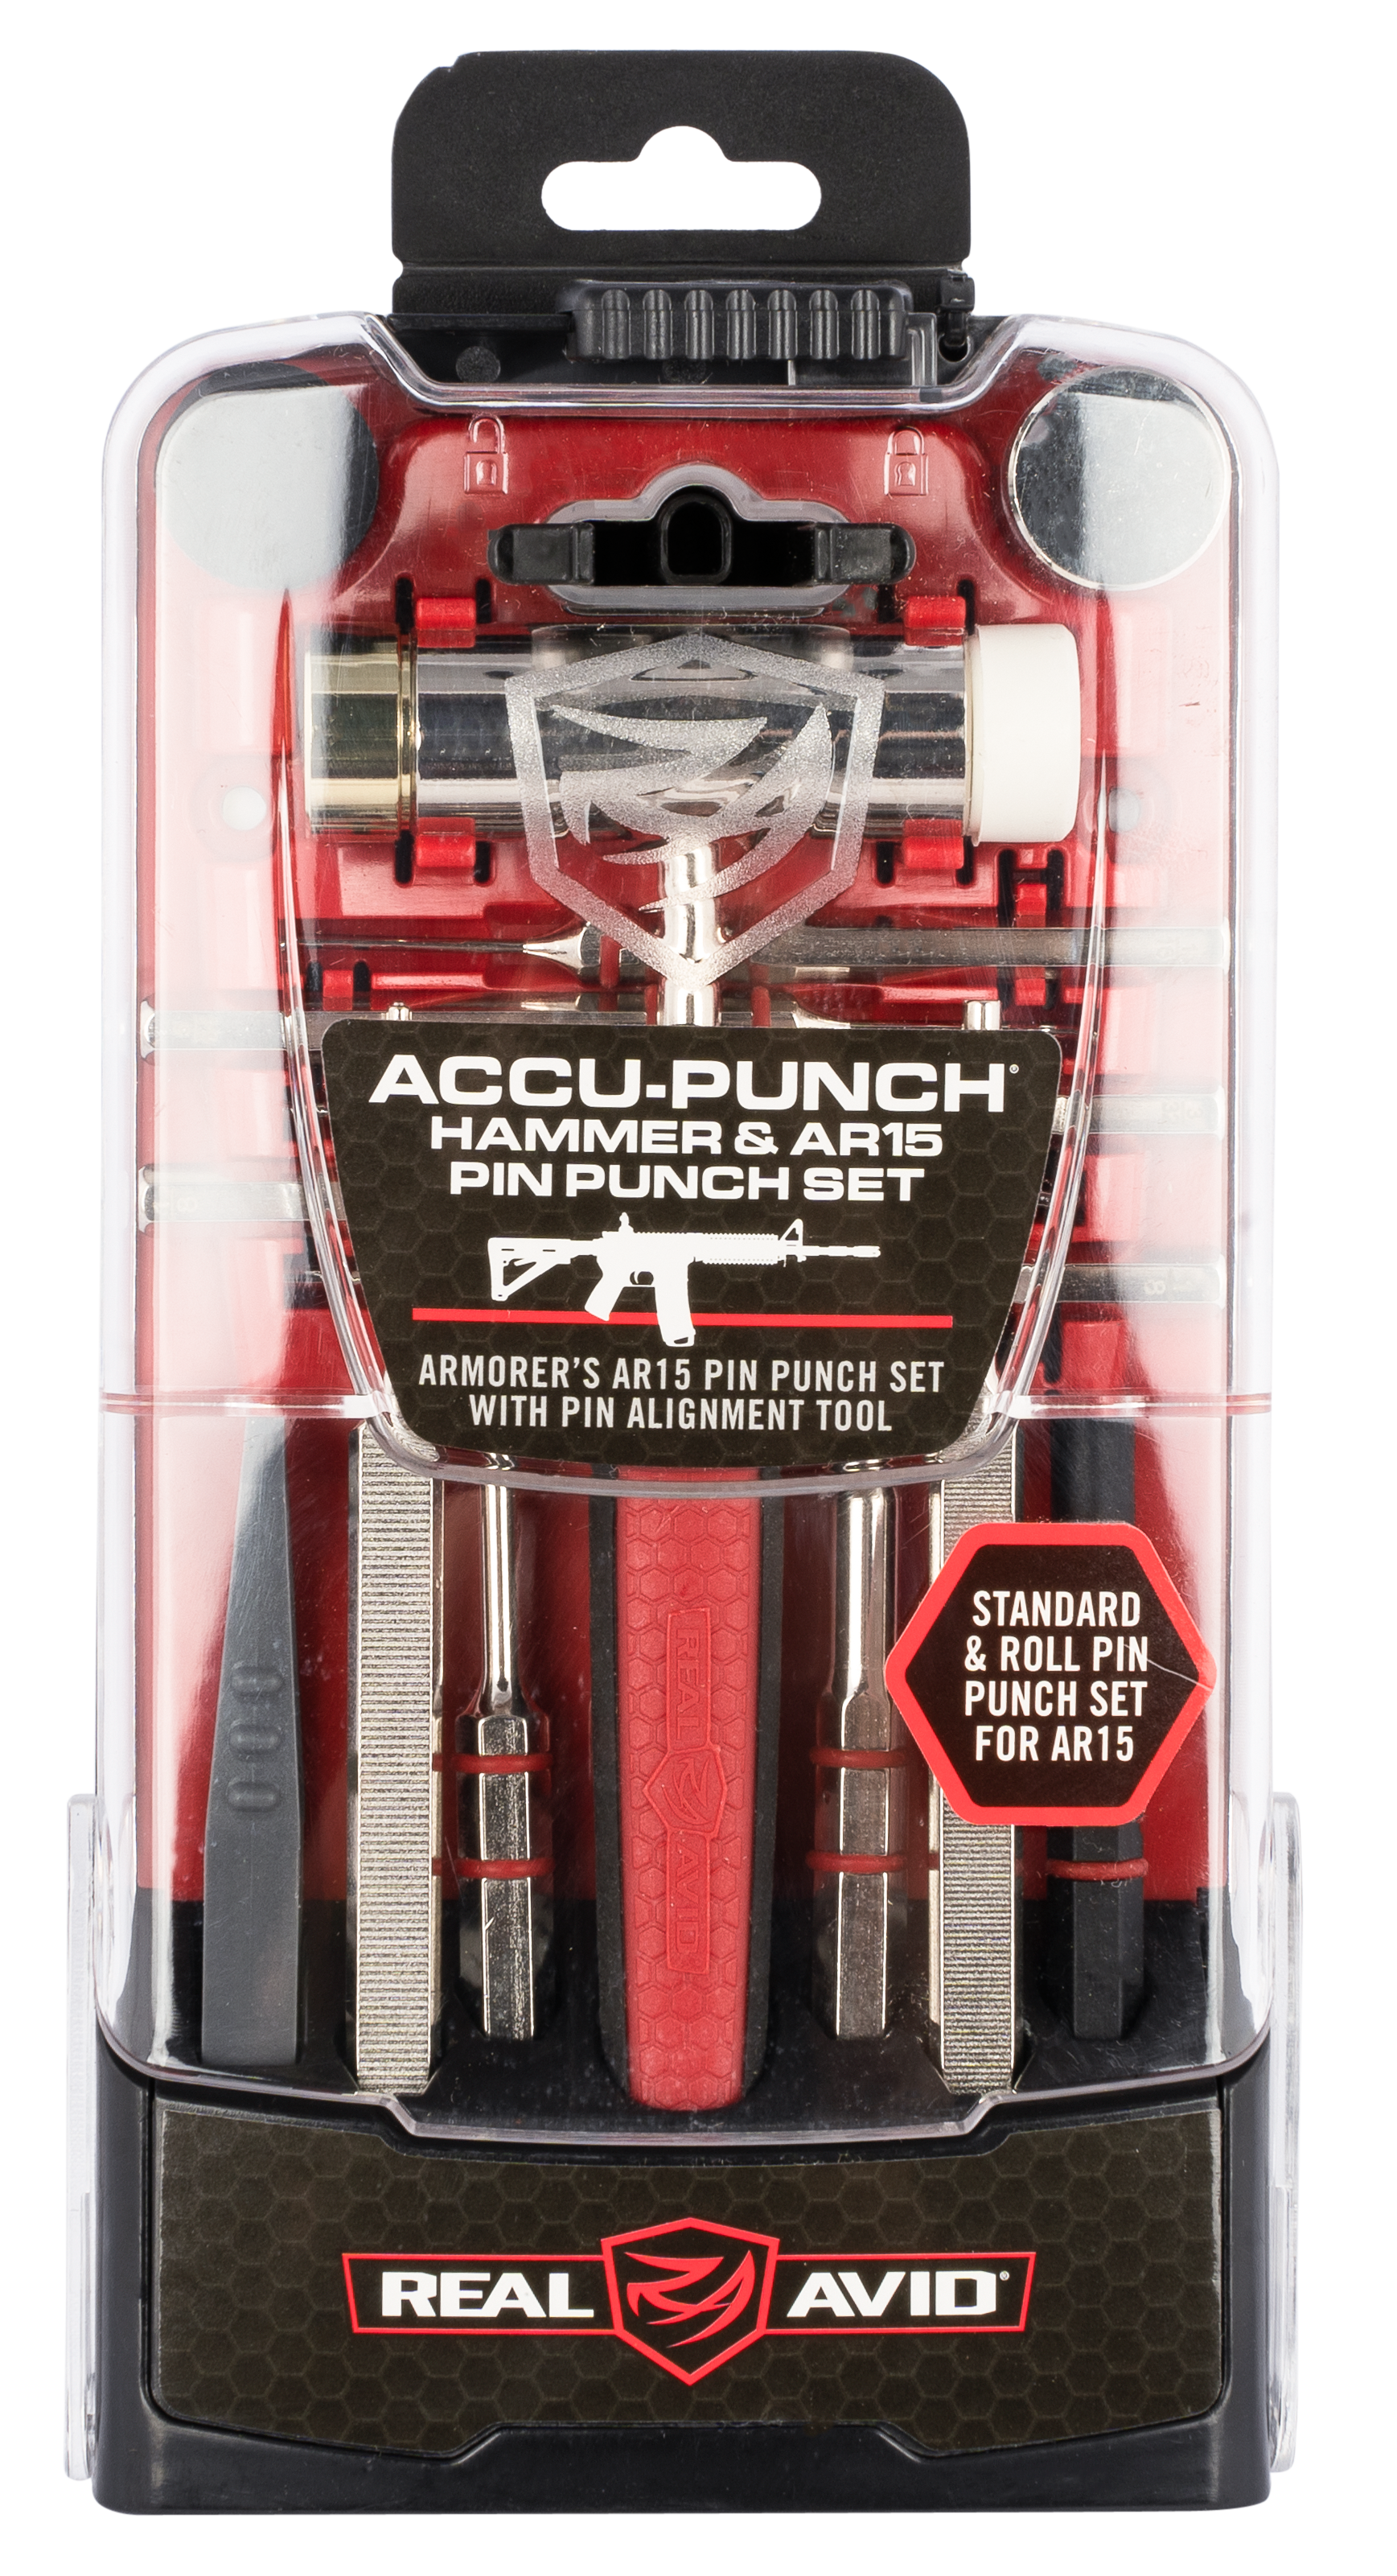 Real Avid Accu Punch Hammer and AR15 Punches Set